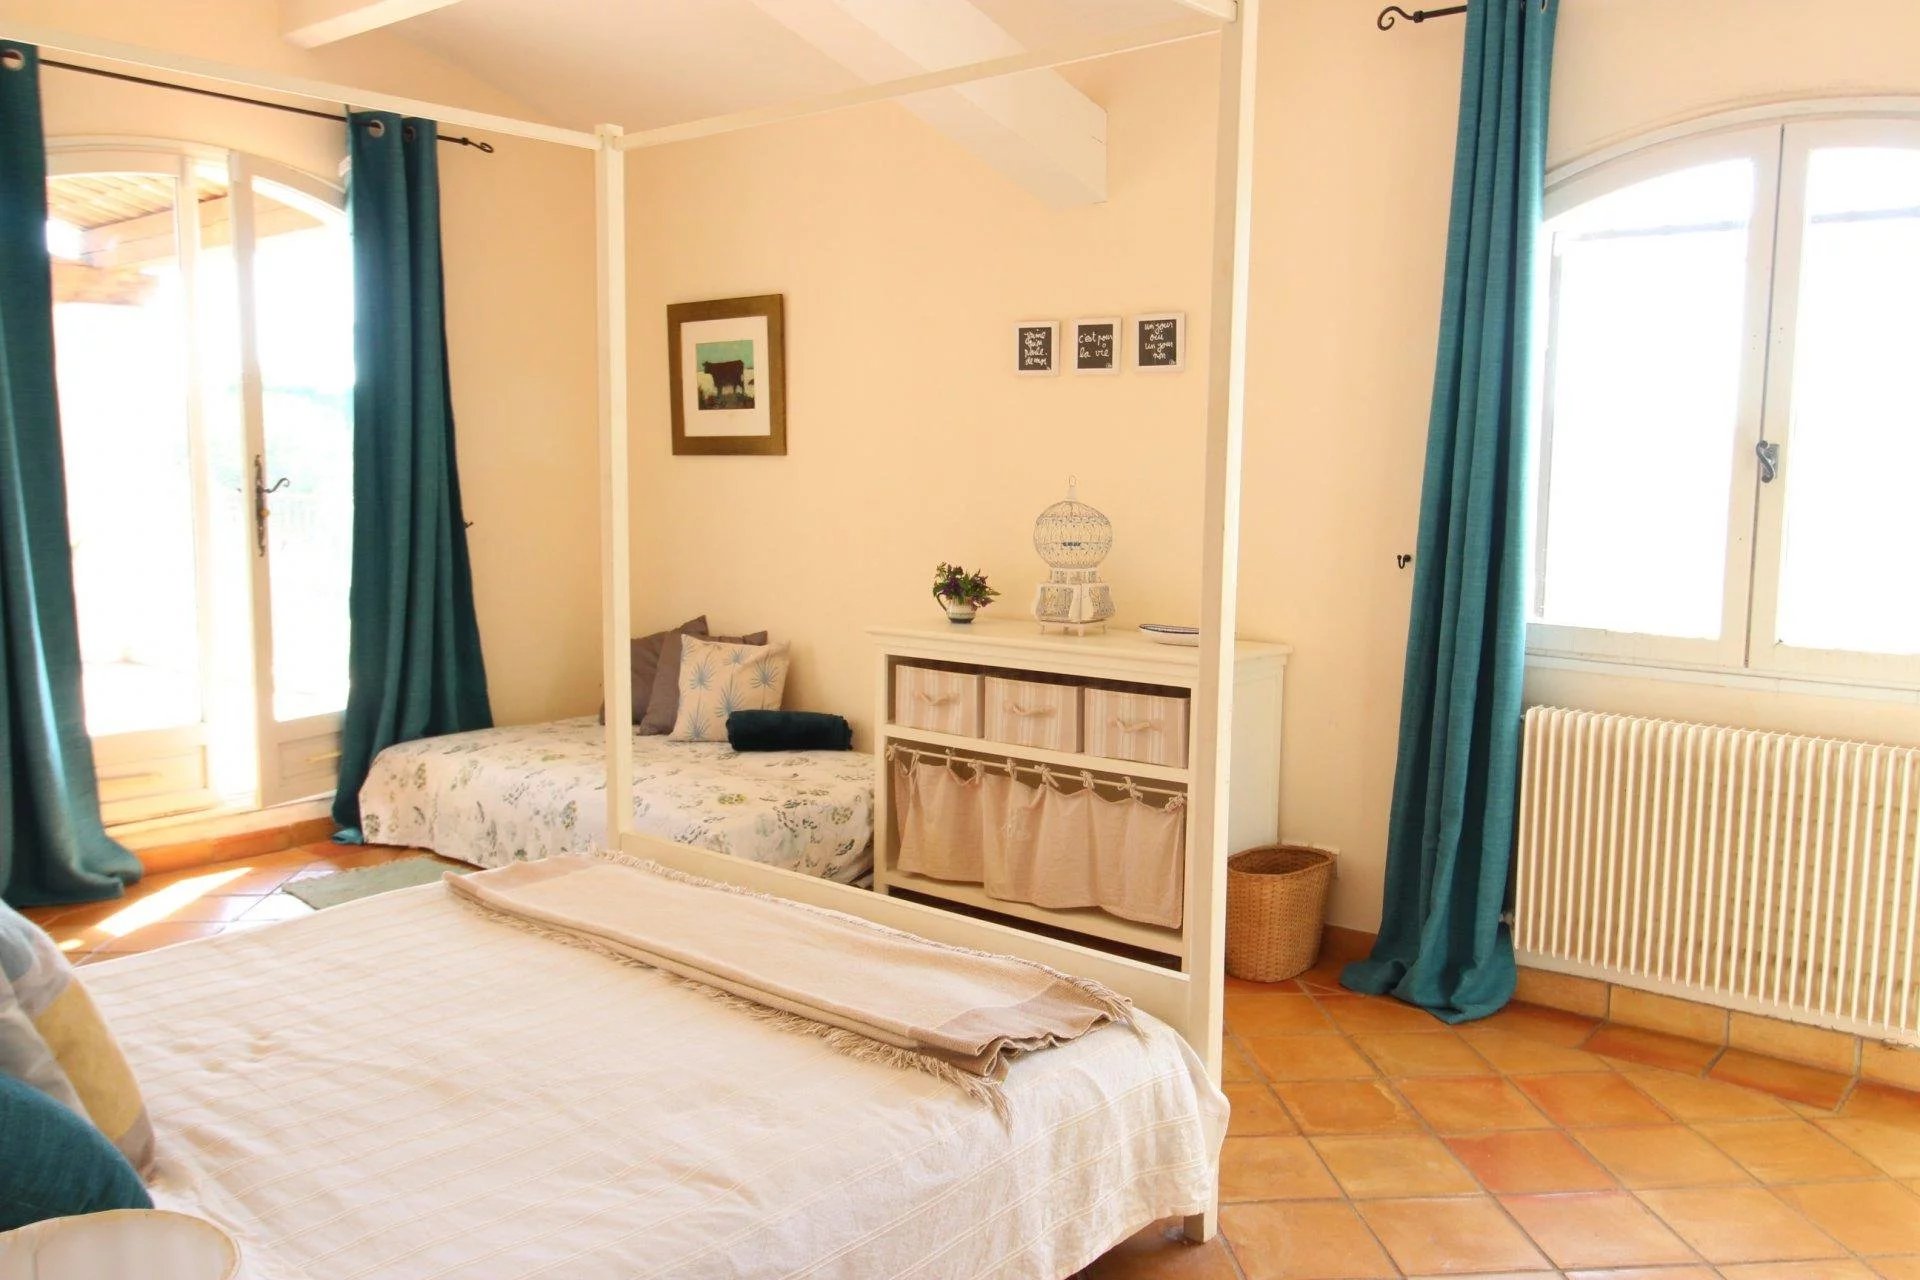 Charming villa with 6 bedrooms and a large flat garden